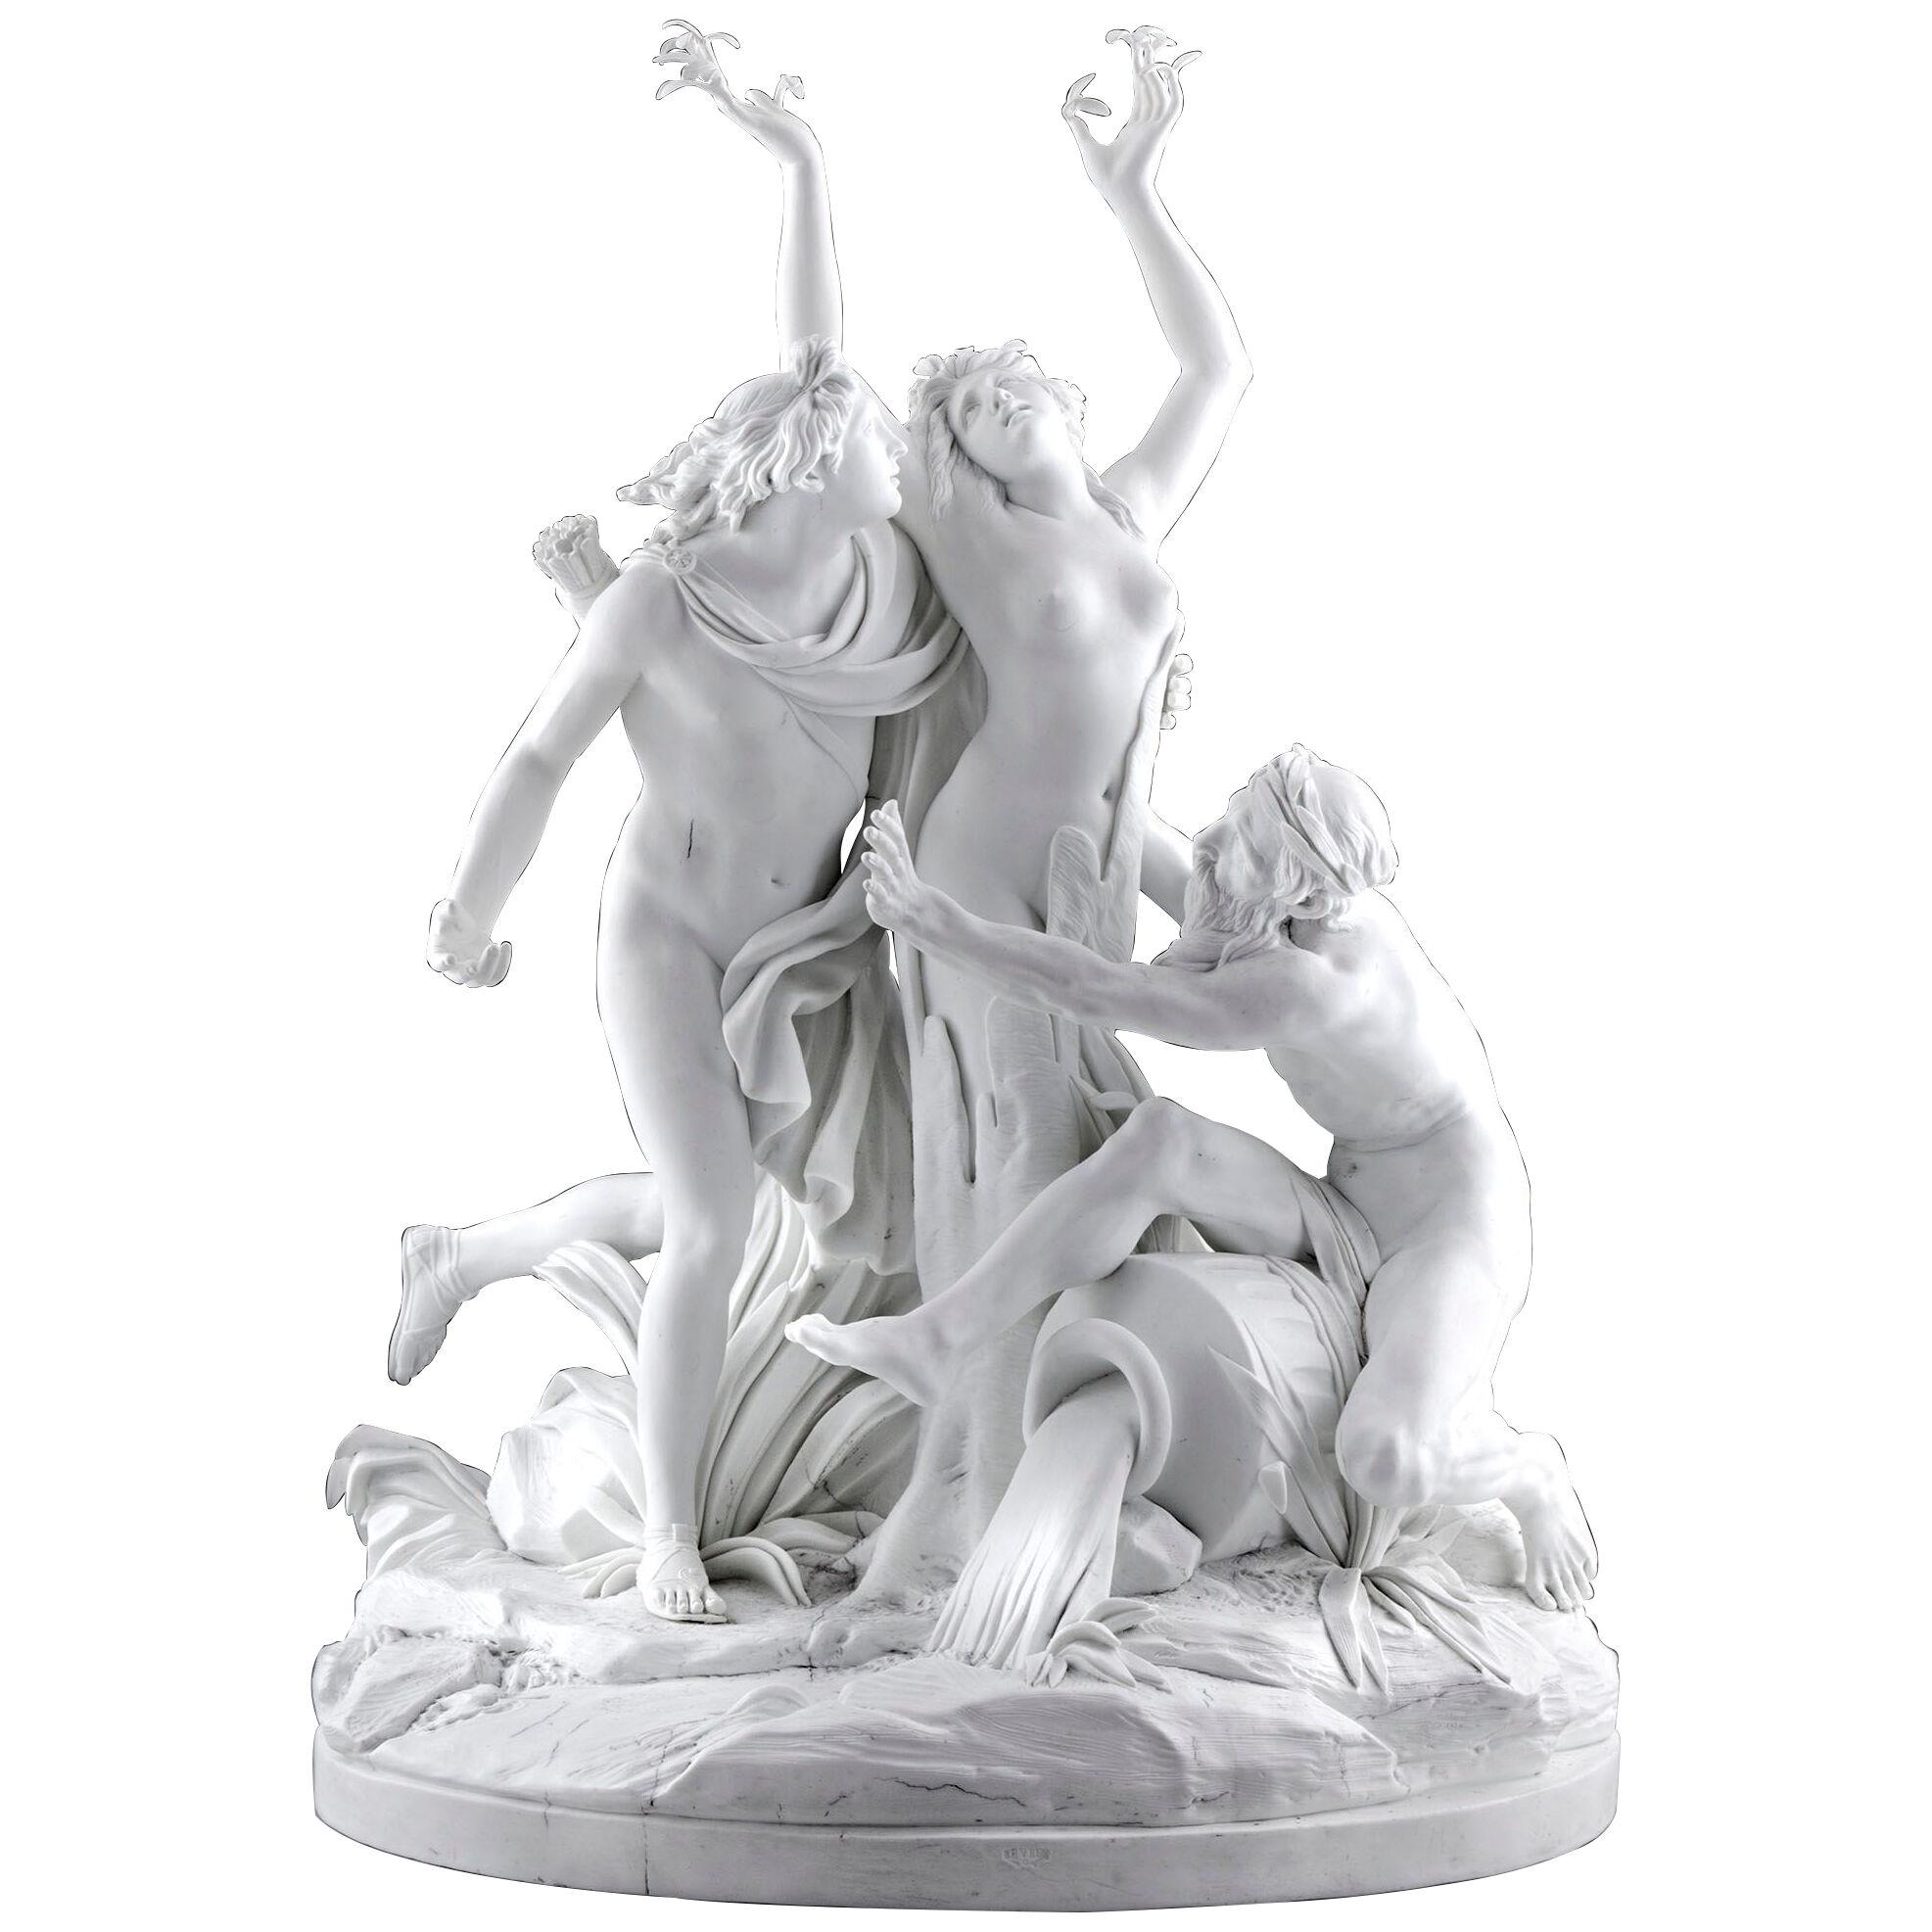 Large Empire Period Sevres Biscuit Porcelain Group of Apollo and Daphne